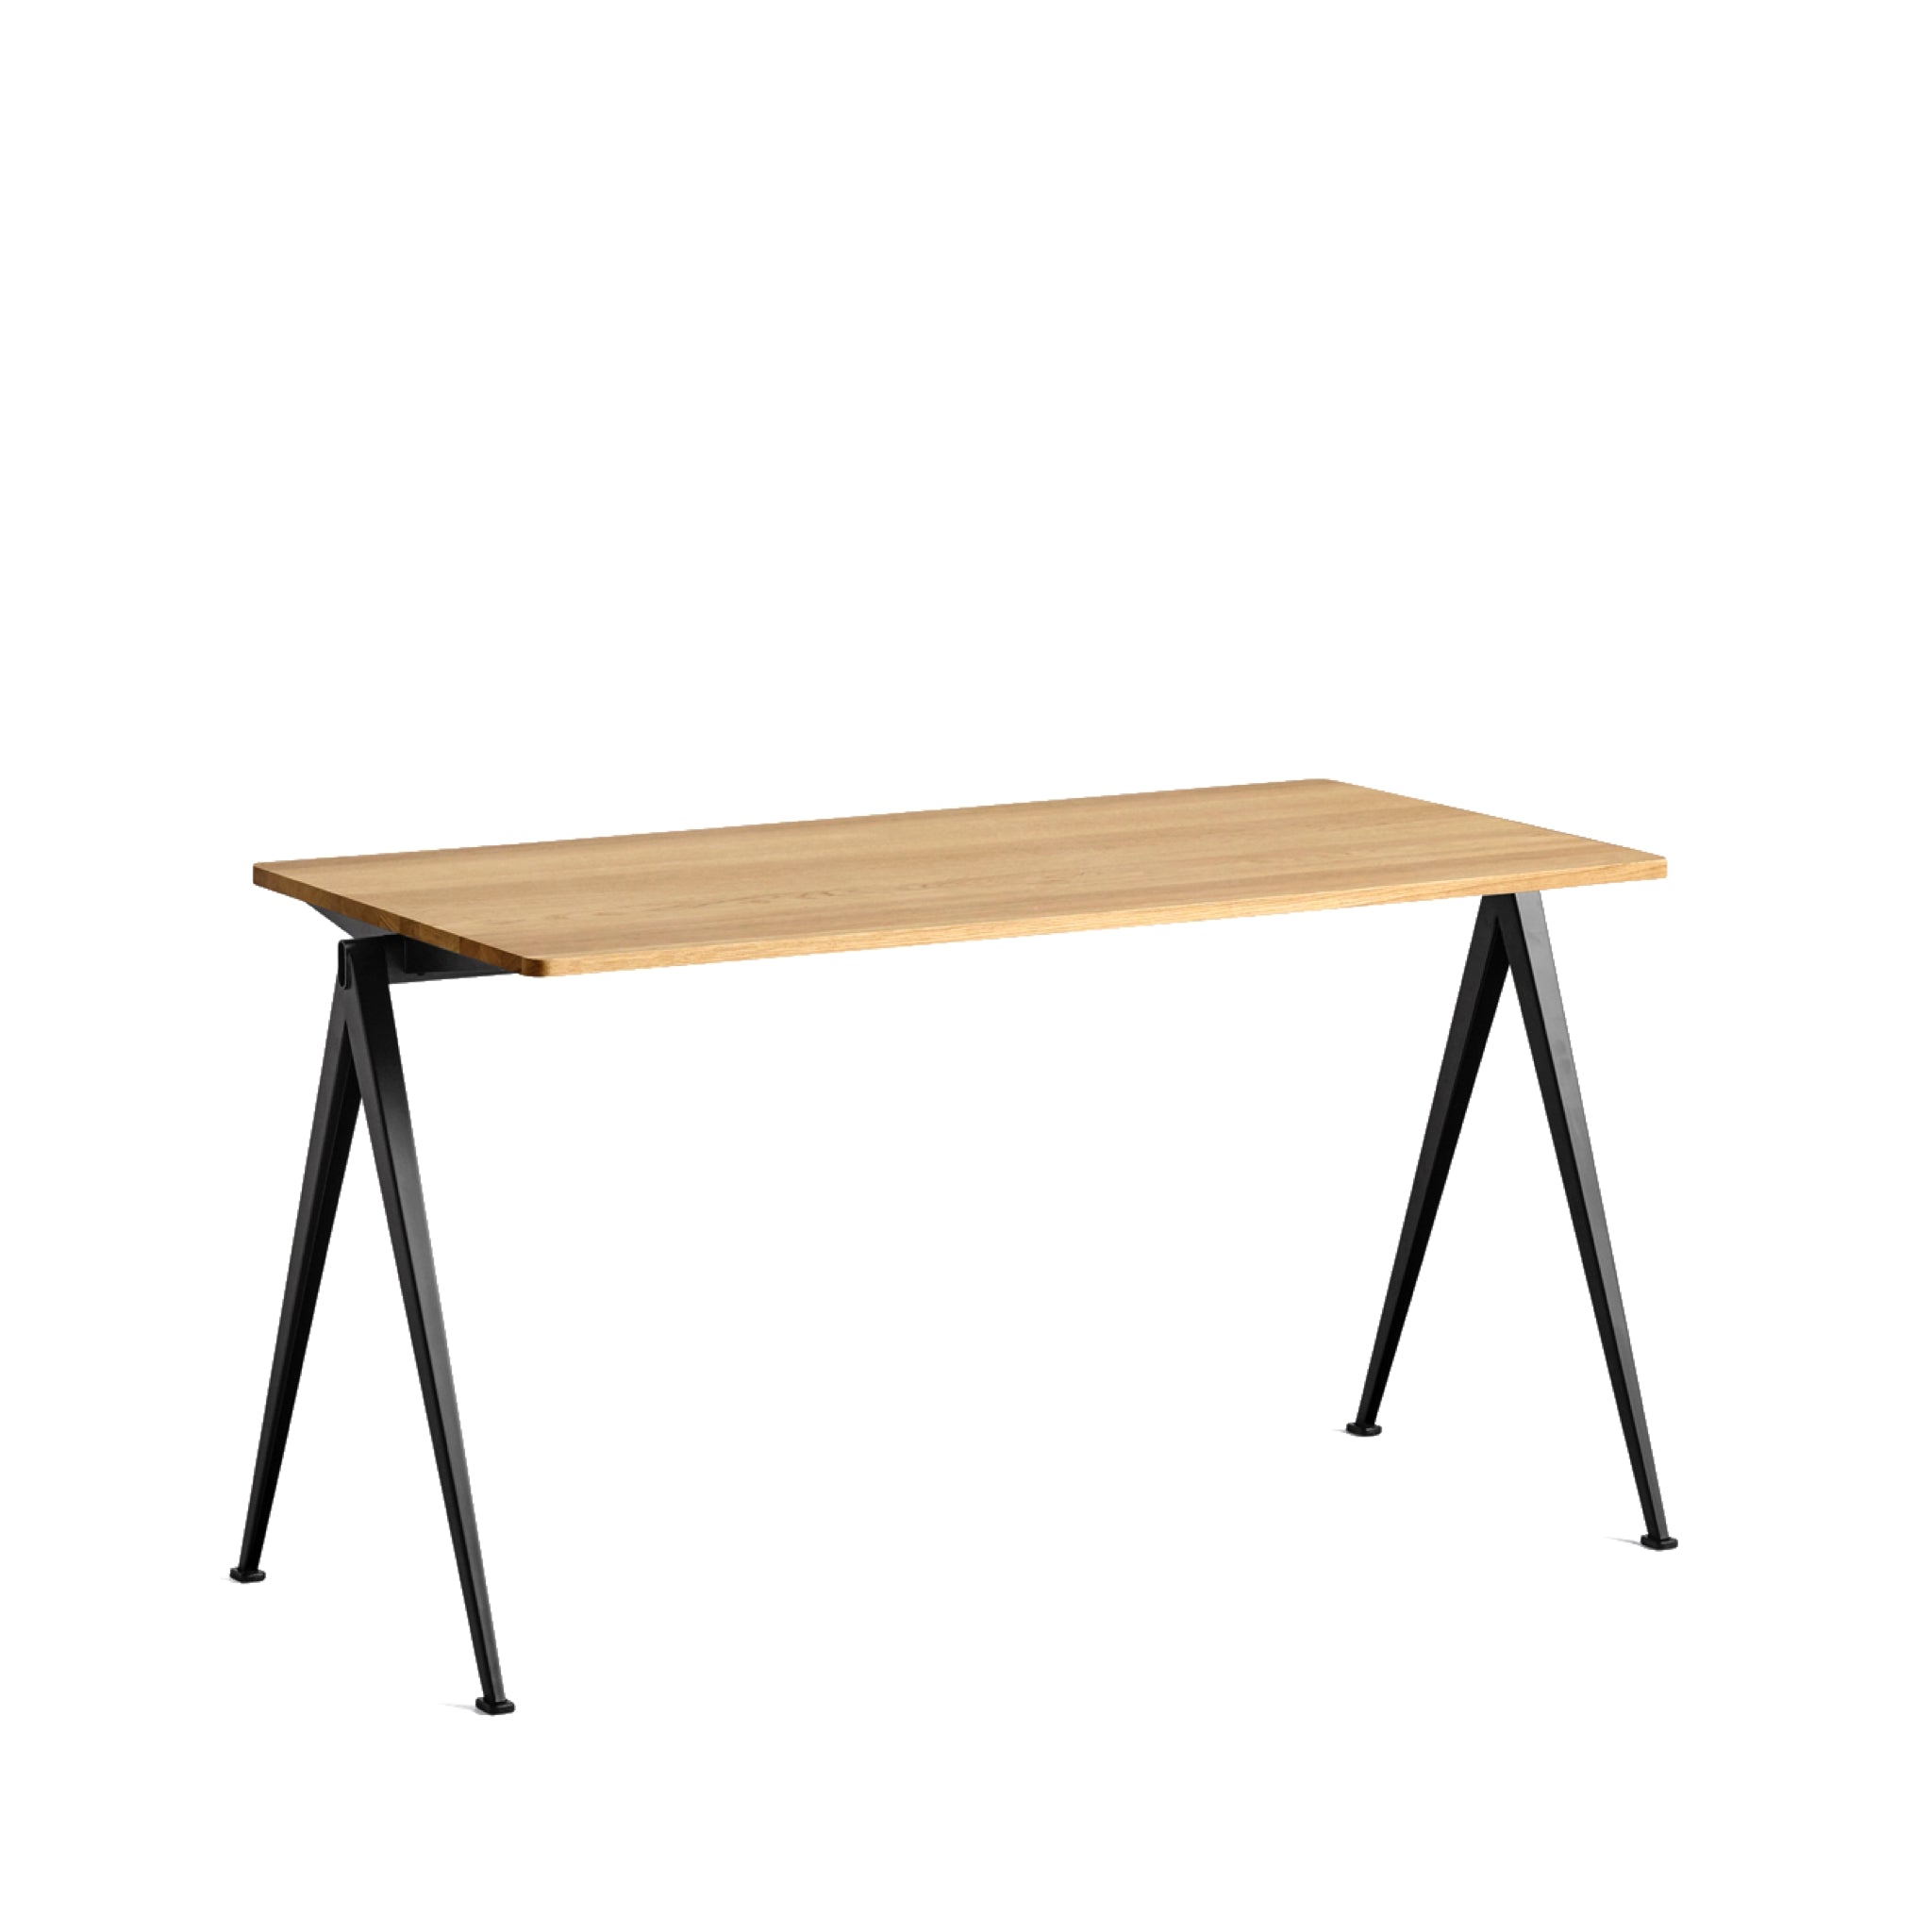 Pyramid Table 01 by Hay